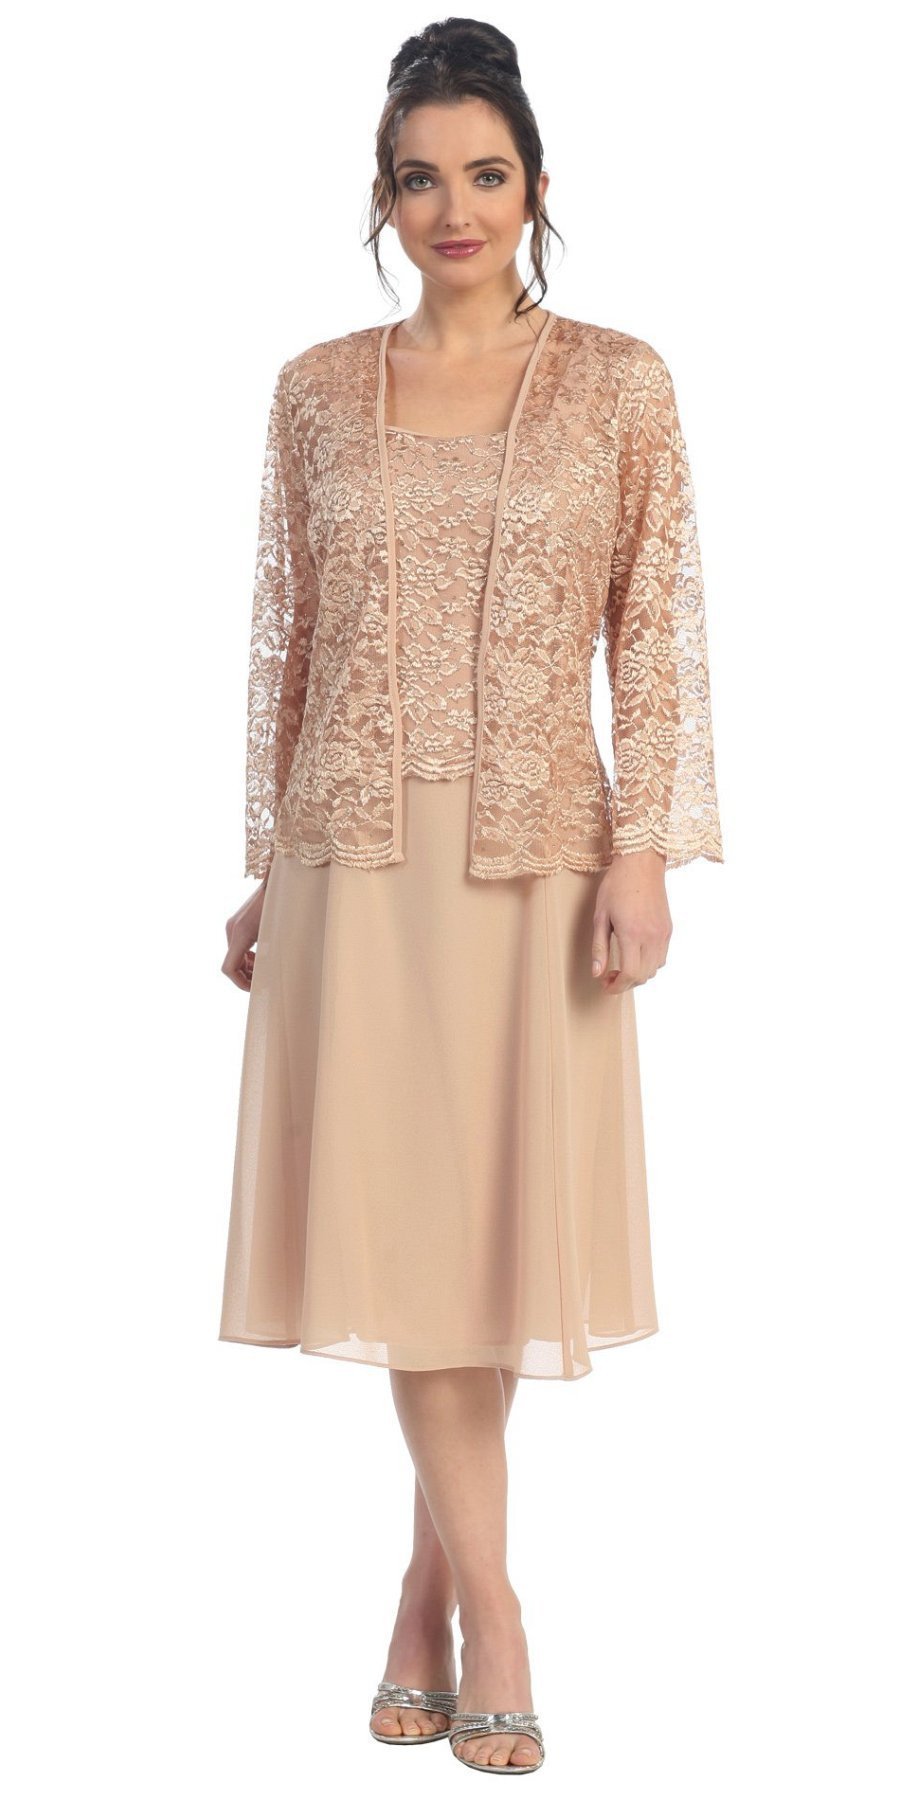 Short Gold Mother of Groom Dress Chiffon Knee Length Lace Jacket